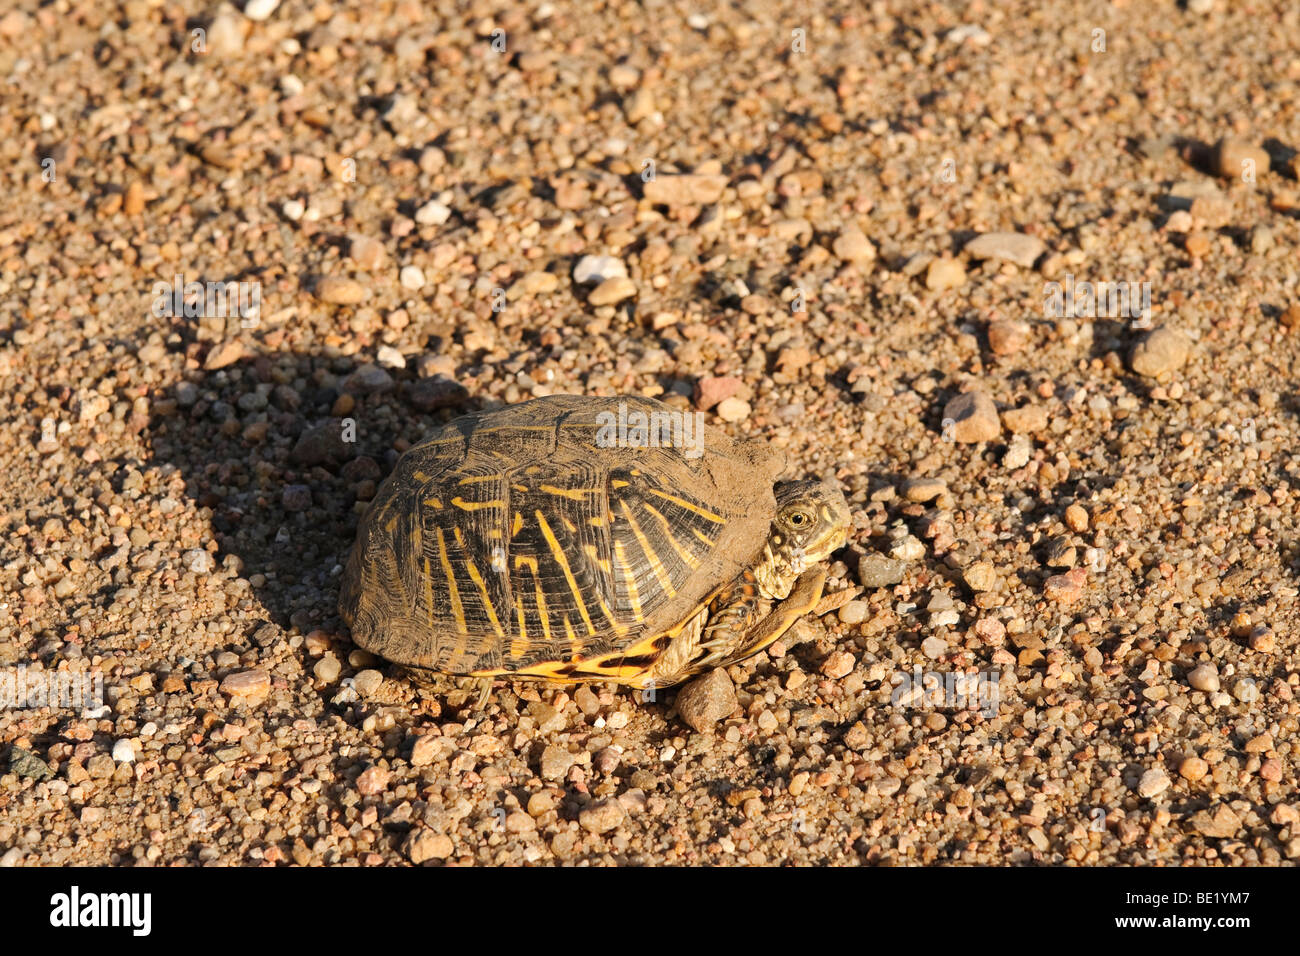 An ornate box turtle on a dirt road in rural Western Kansas Stock Photo